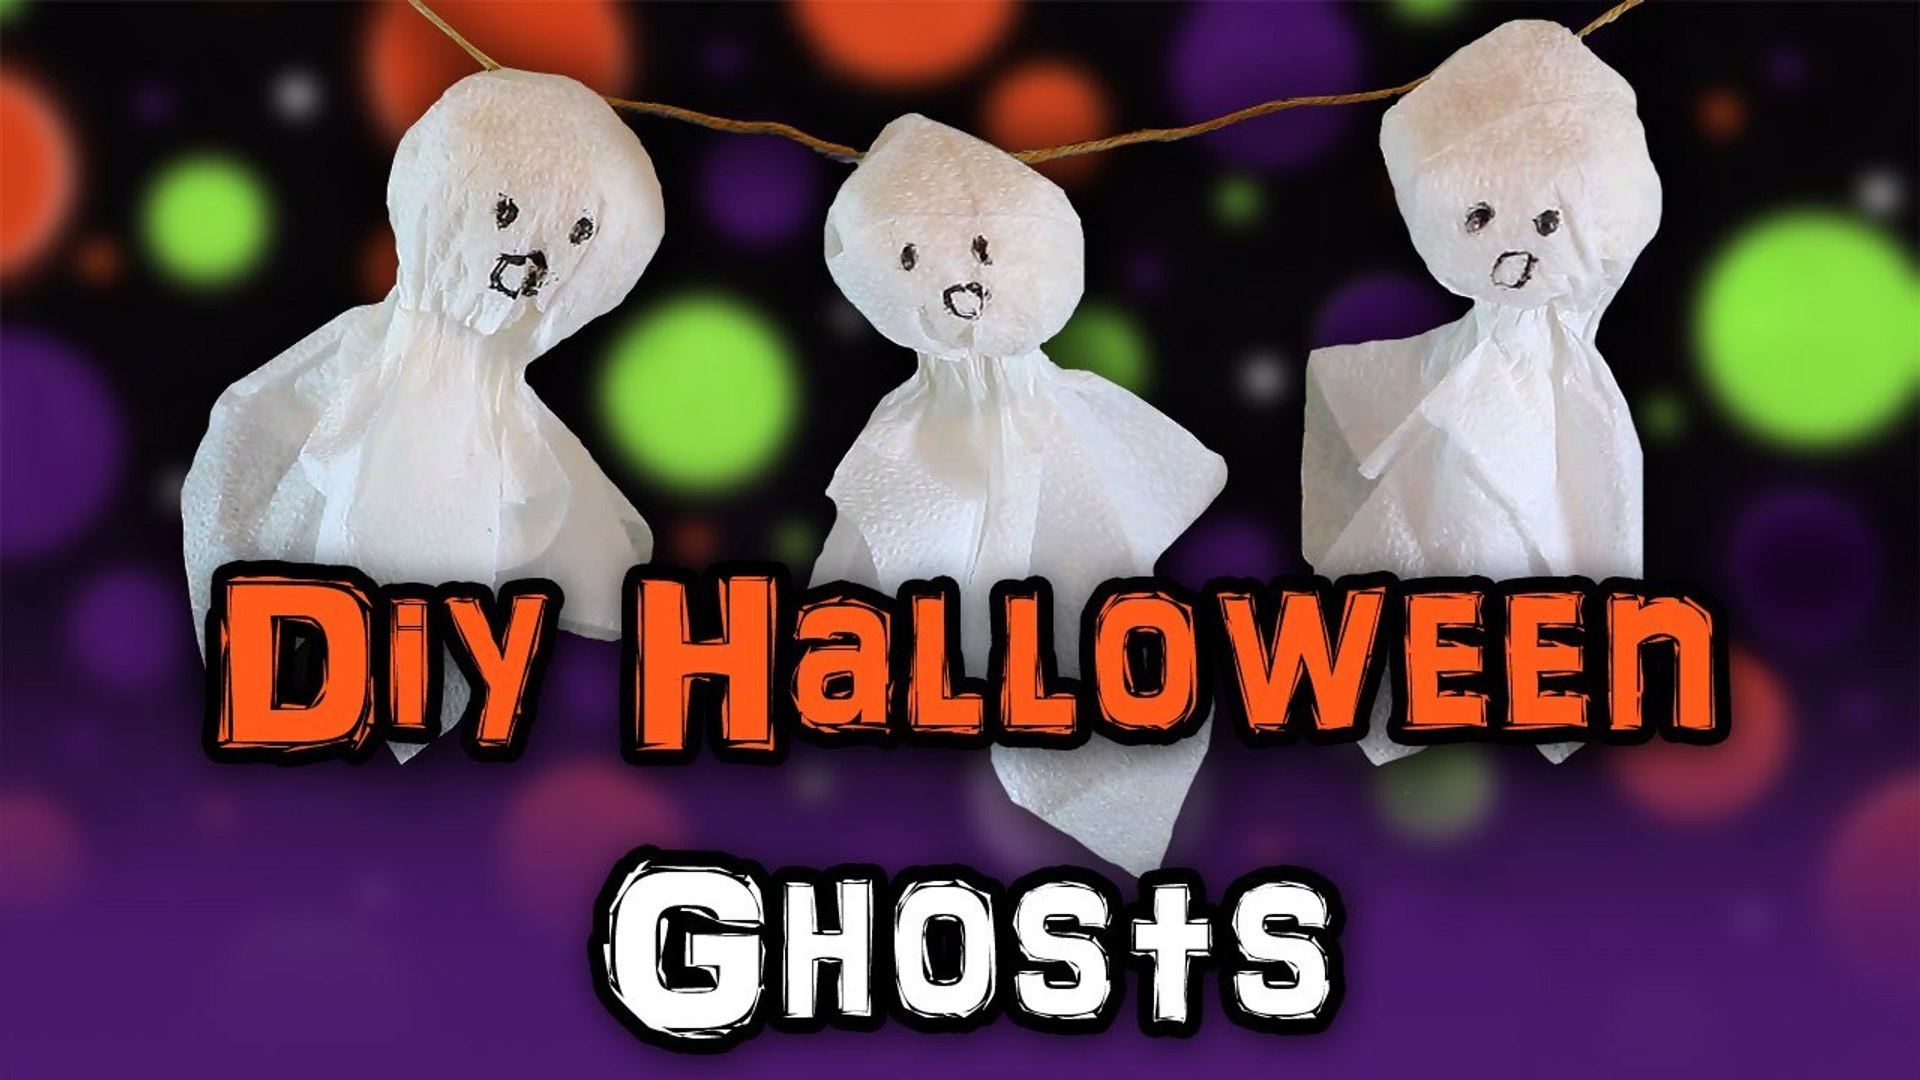 Diy Halloween Ghosts Decorate A Hamster Cage Video Dailymotion